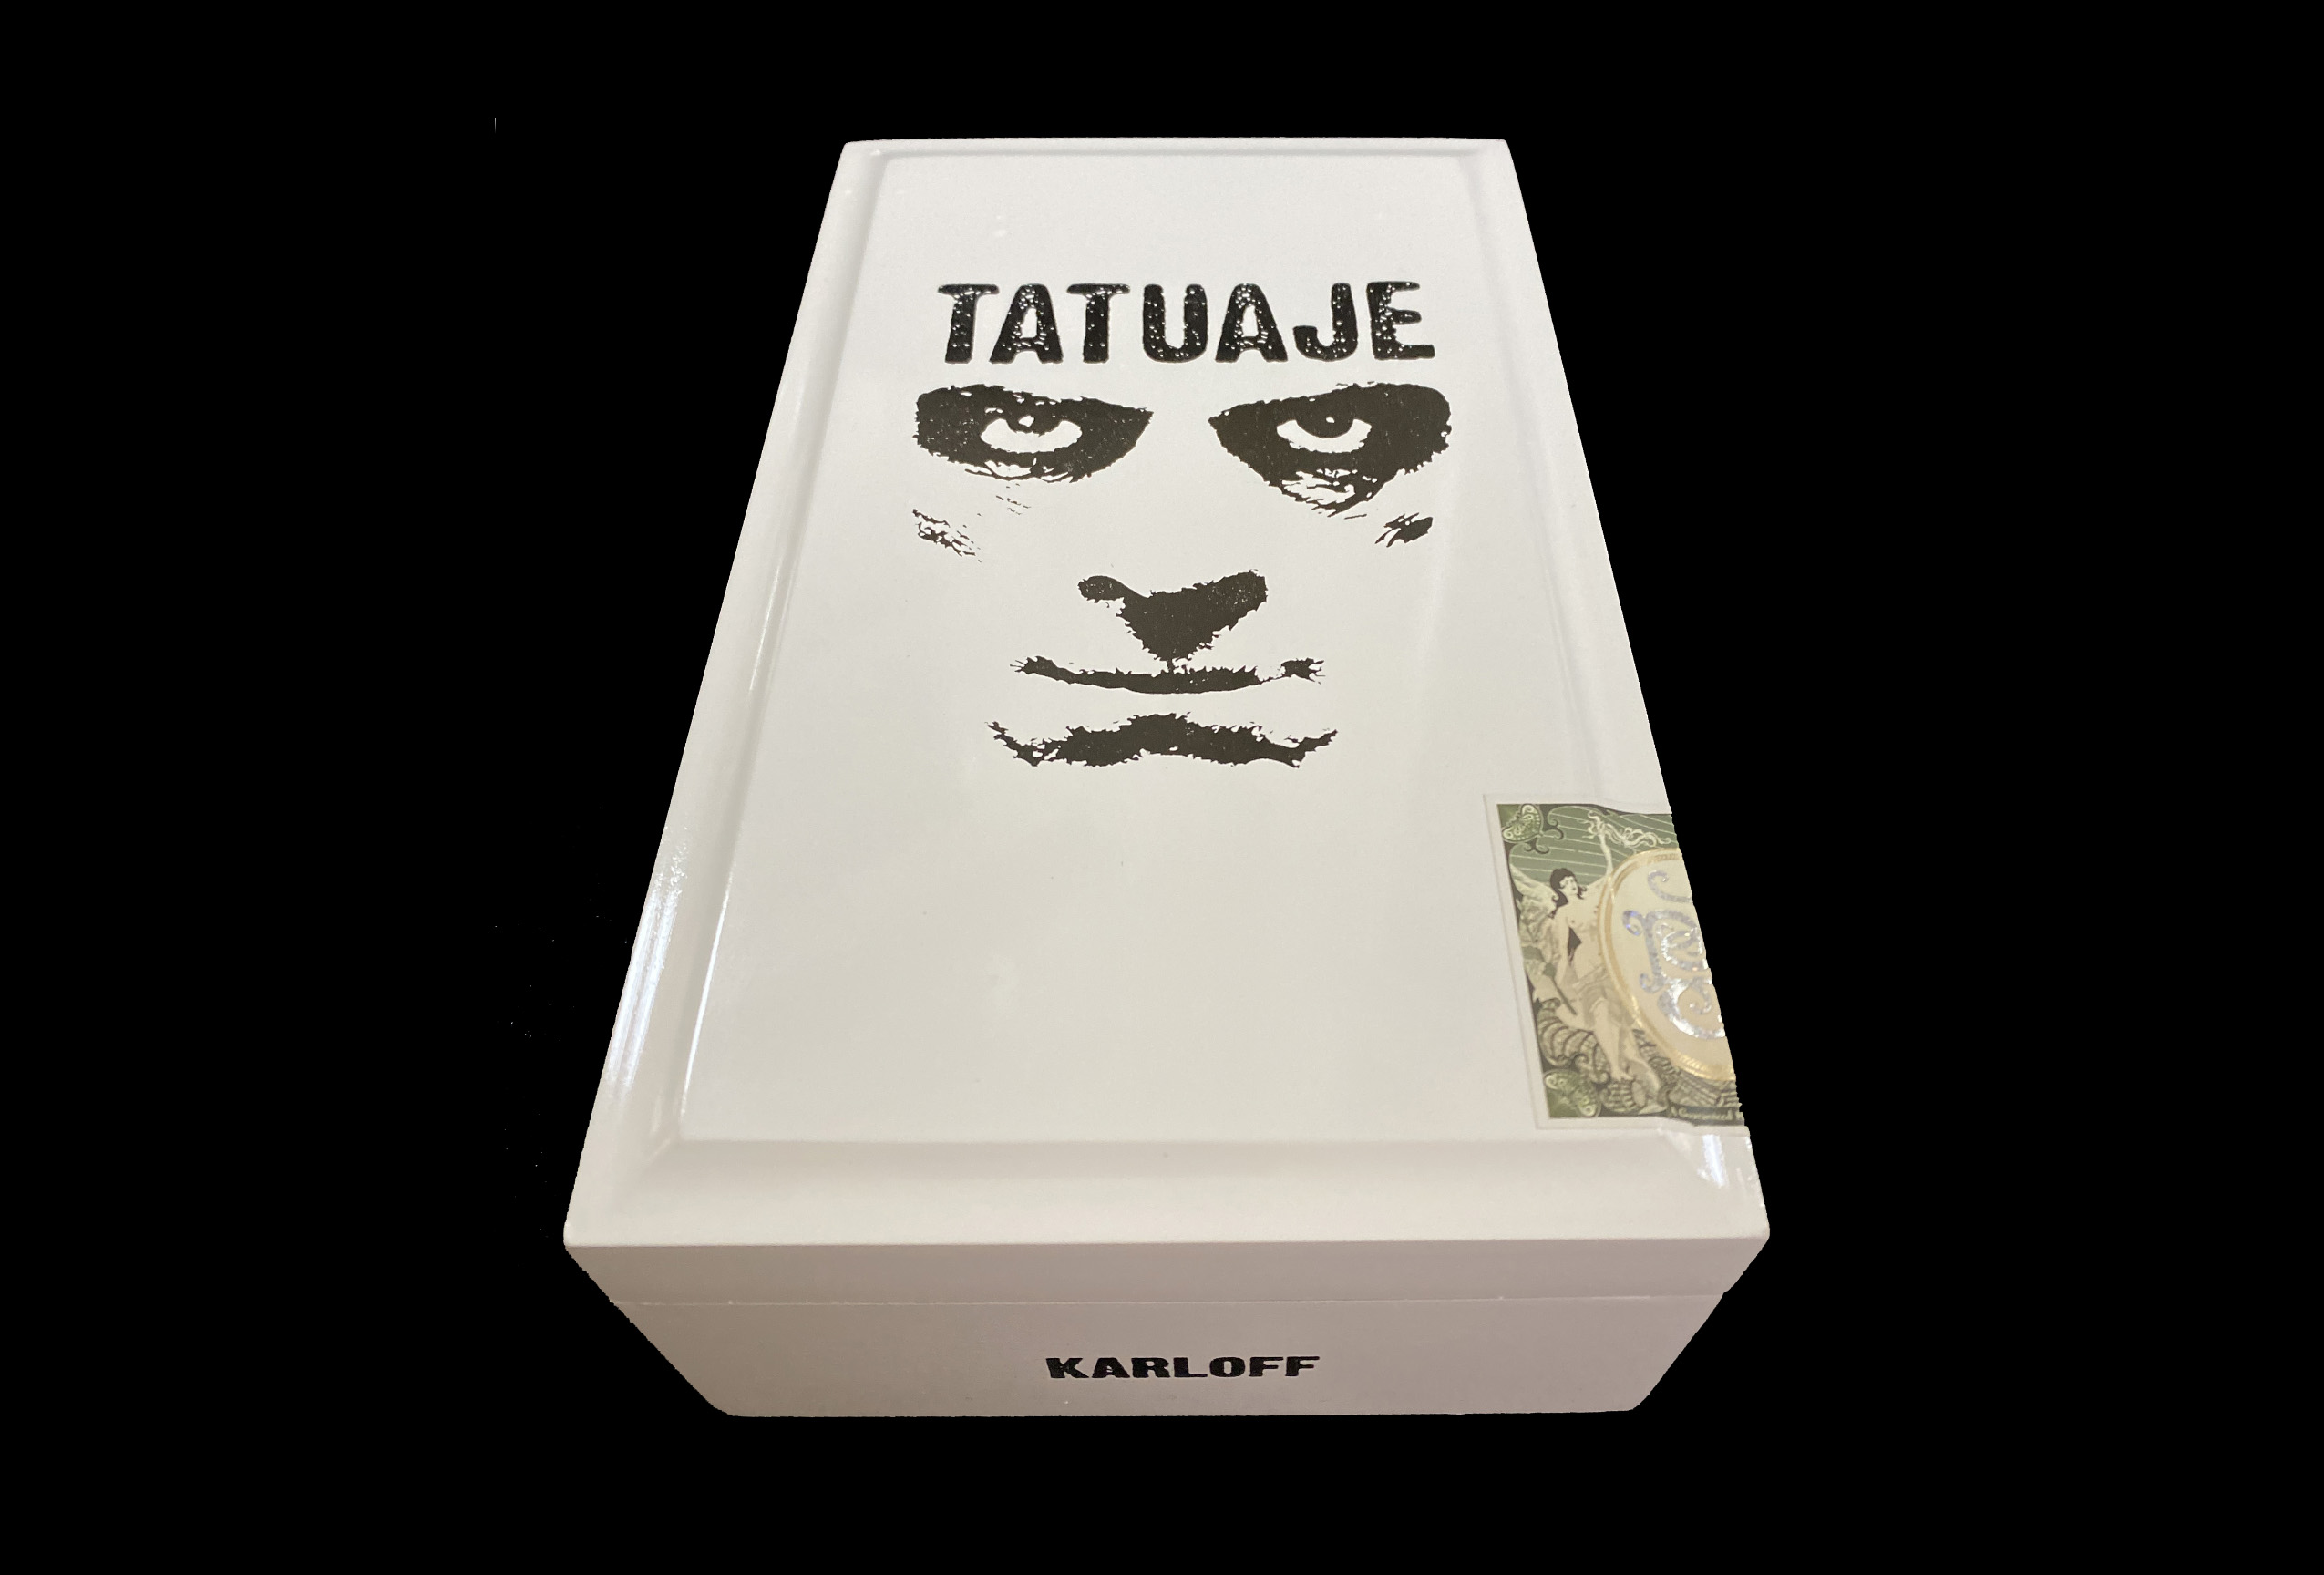 October Brings Another Anticipated Tatuaje Release In the Form of the Karloff